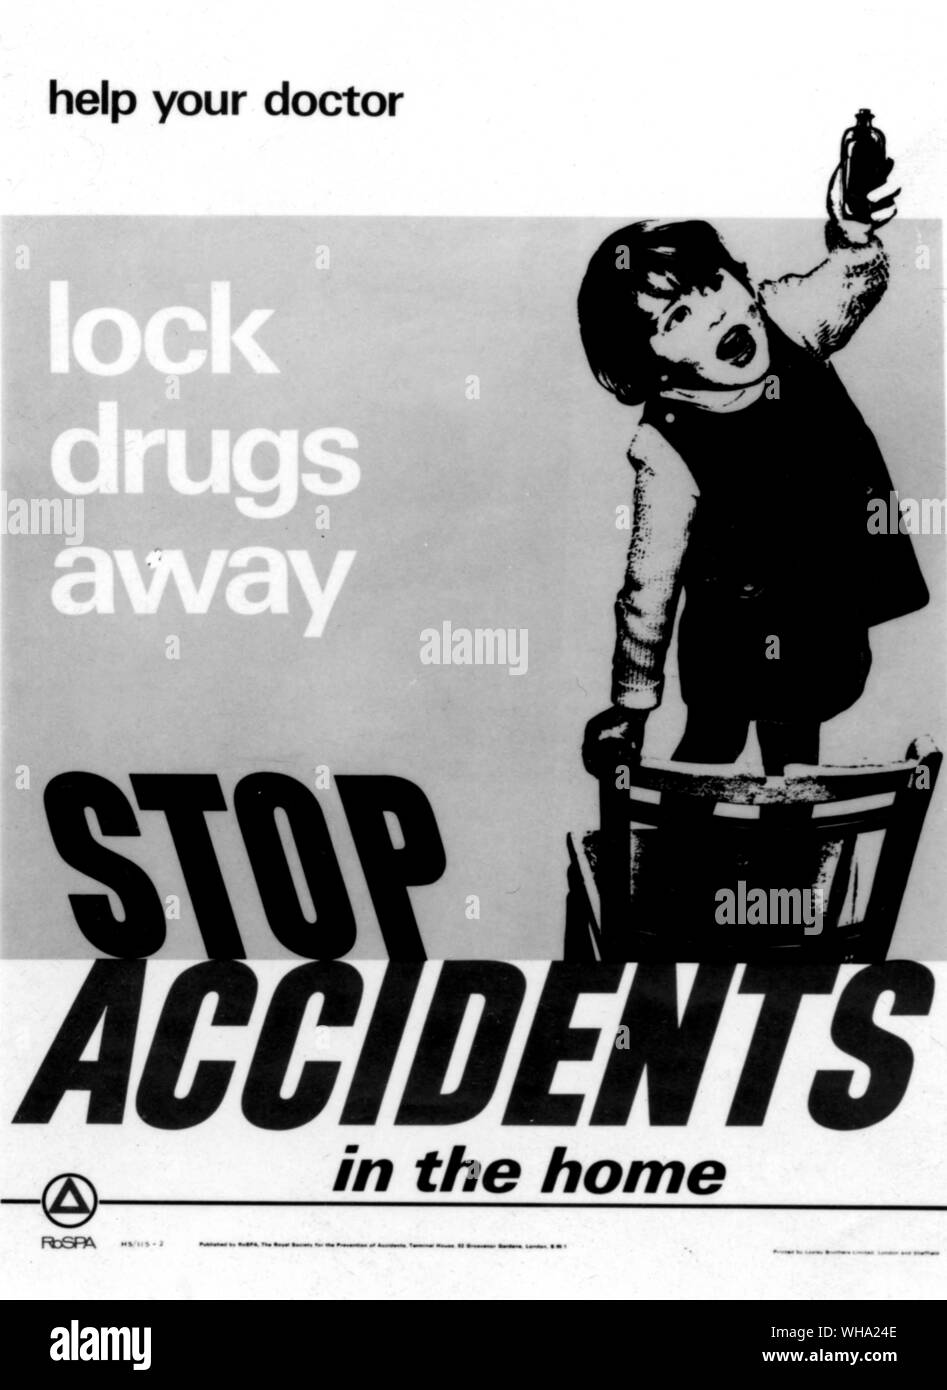 WW2: War poster/ Lock Drugs Away. Stop Accidents. RSPA poster. Stock Photo